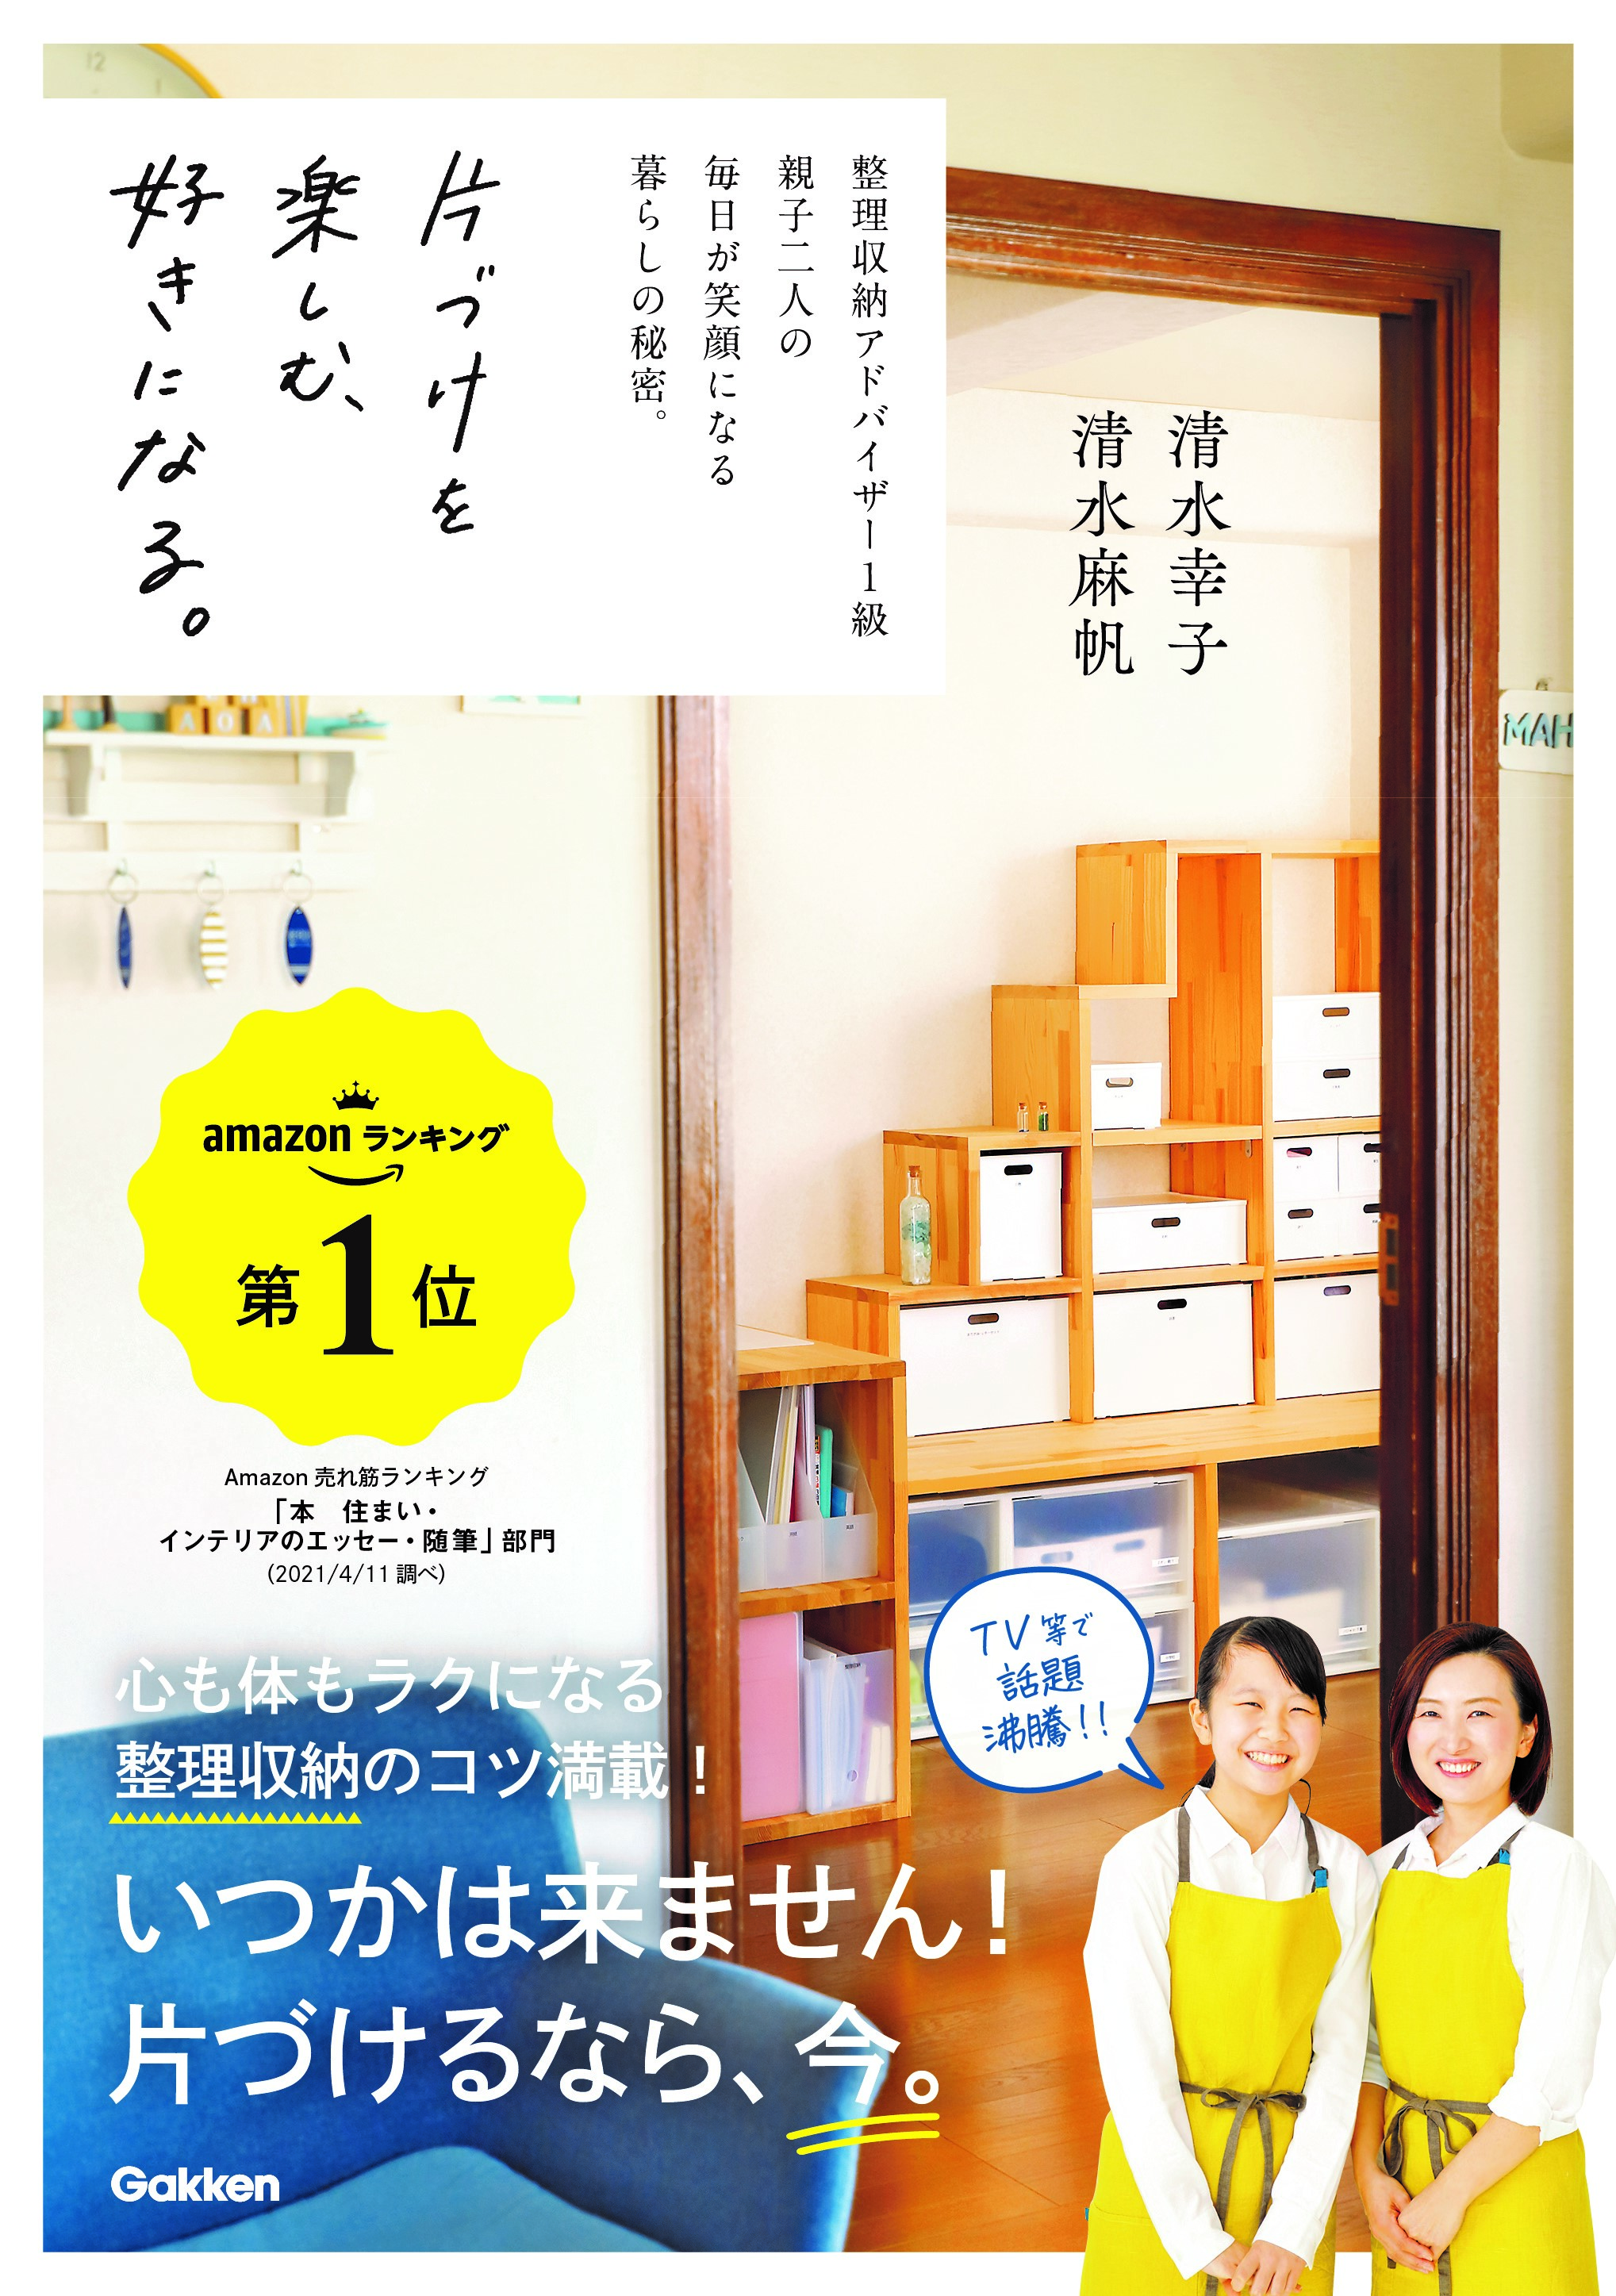 <br />
<b>Notice</b>:  Undefined variable: ID in <b>/var/www/vhosts/housekeeping-library.jp/httpdocs/contents/wp/wp-content/themes/housekeeping_library/single-books.php</b> on line <b>46</b><br />
「片づけを楽しむ、好きになる。」